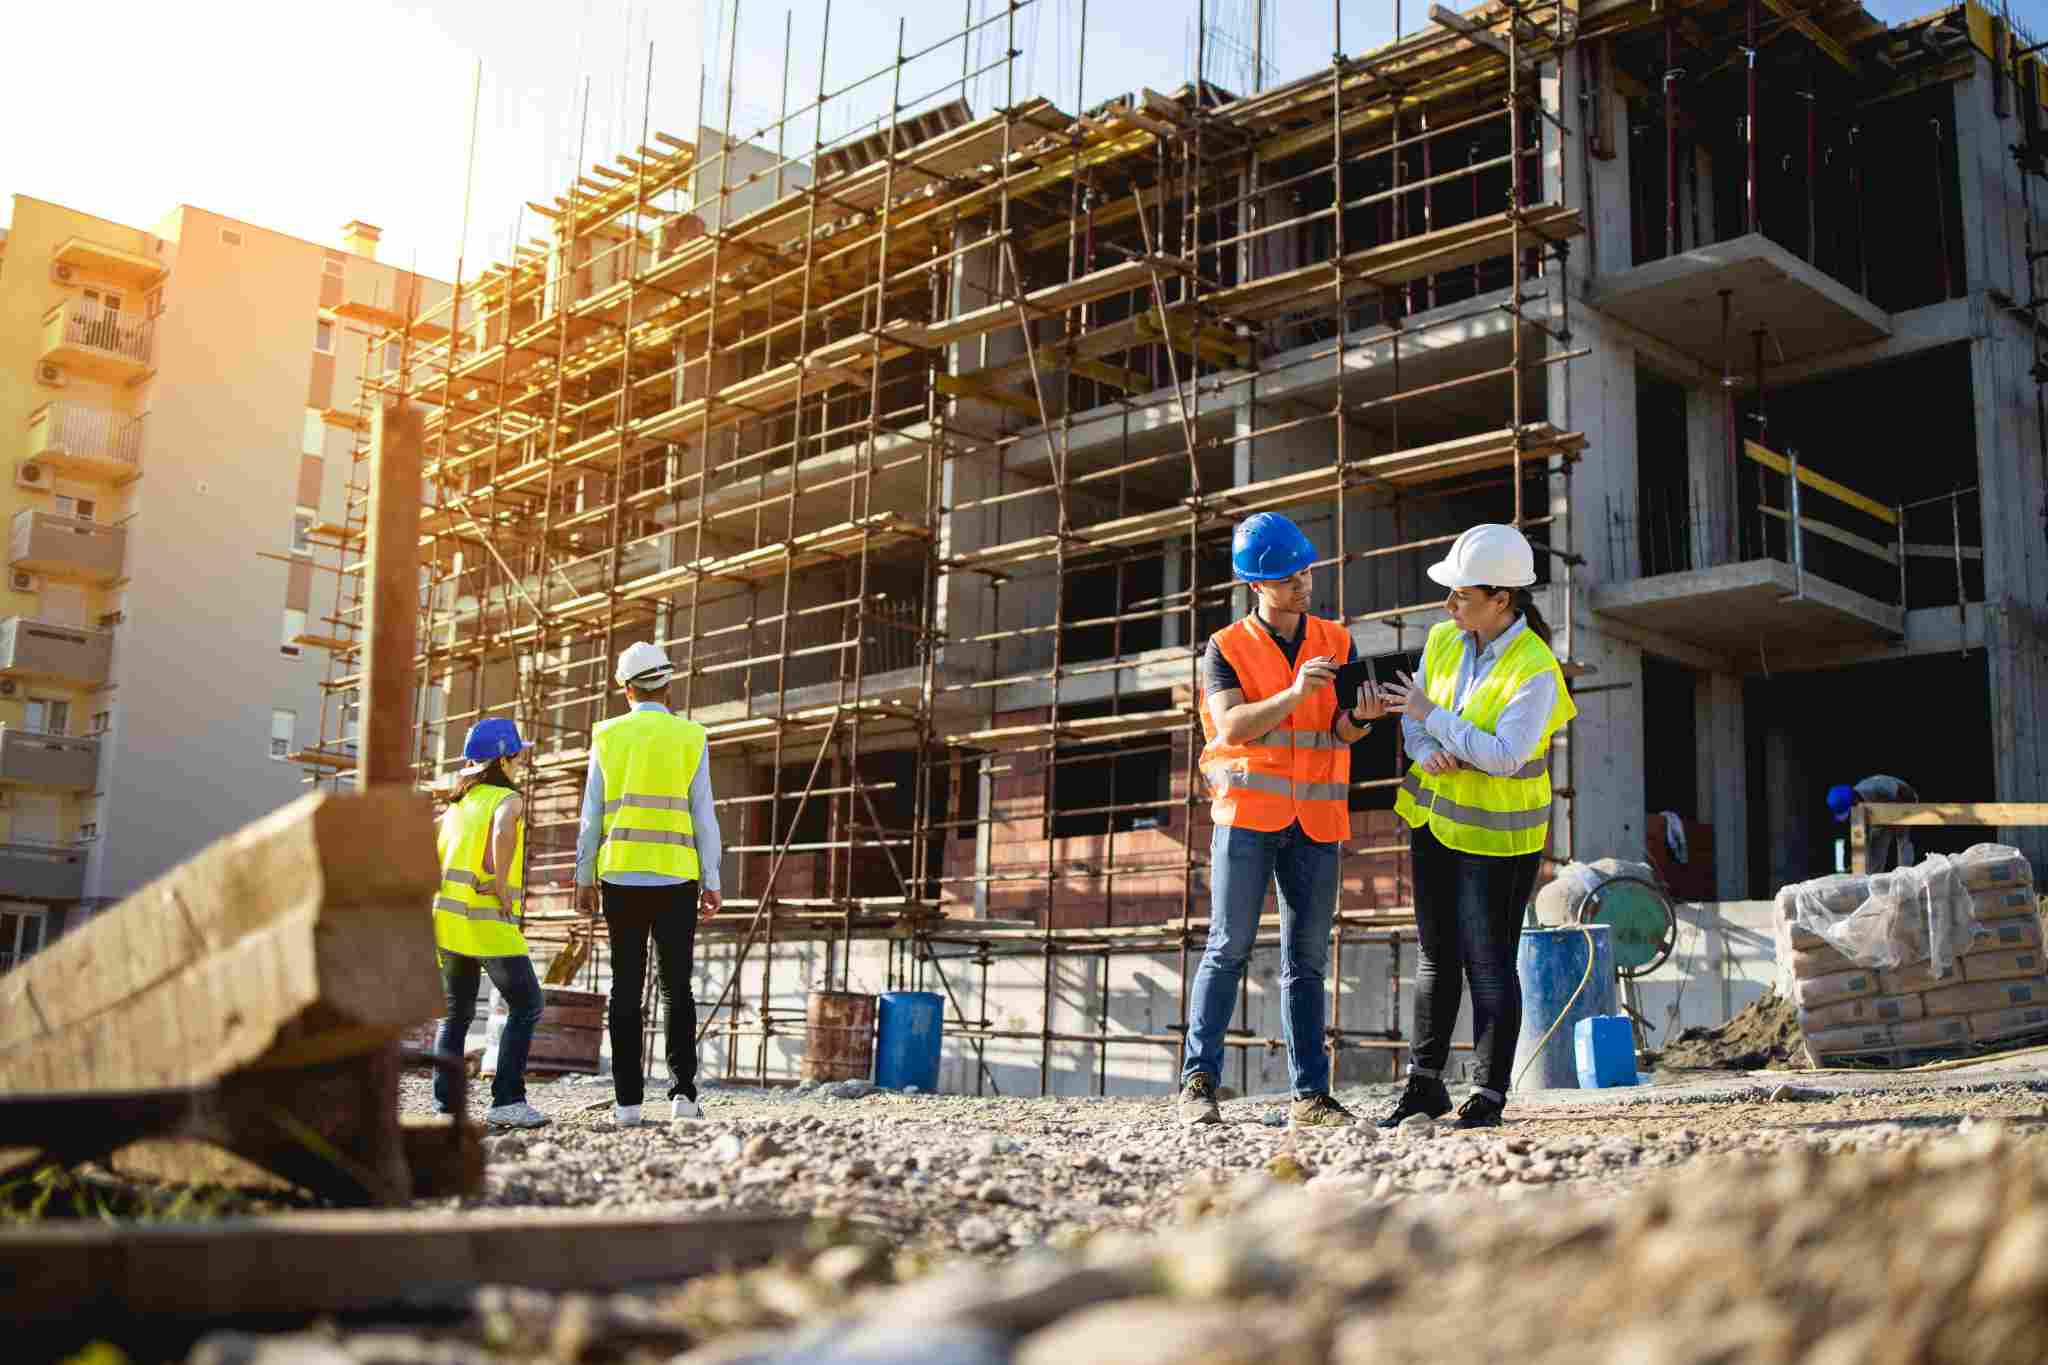 How The SBA Standards For SMBs Impact GovCons In The Construction Industry - KatzAbosch